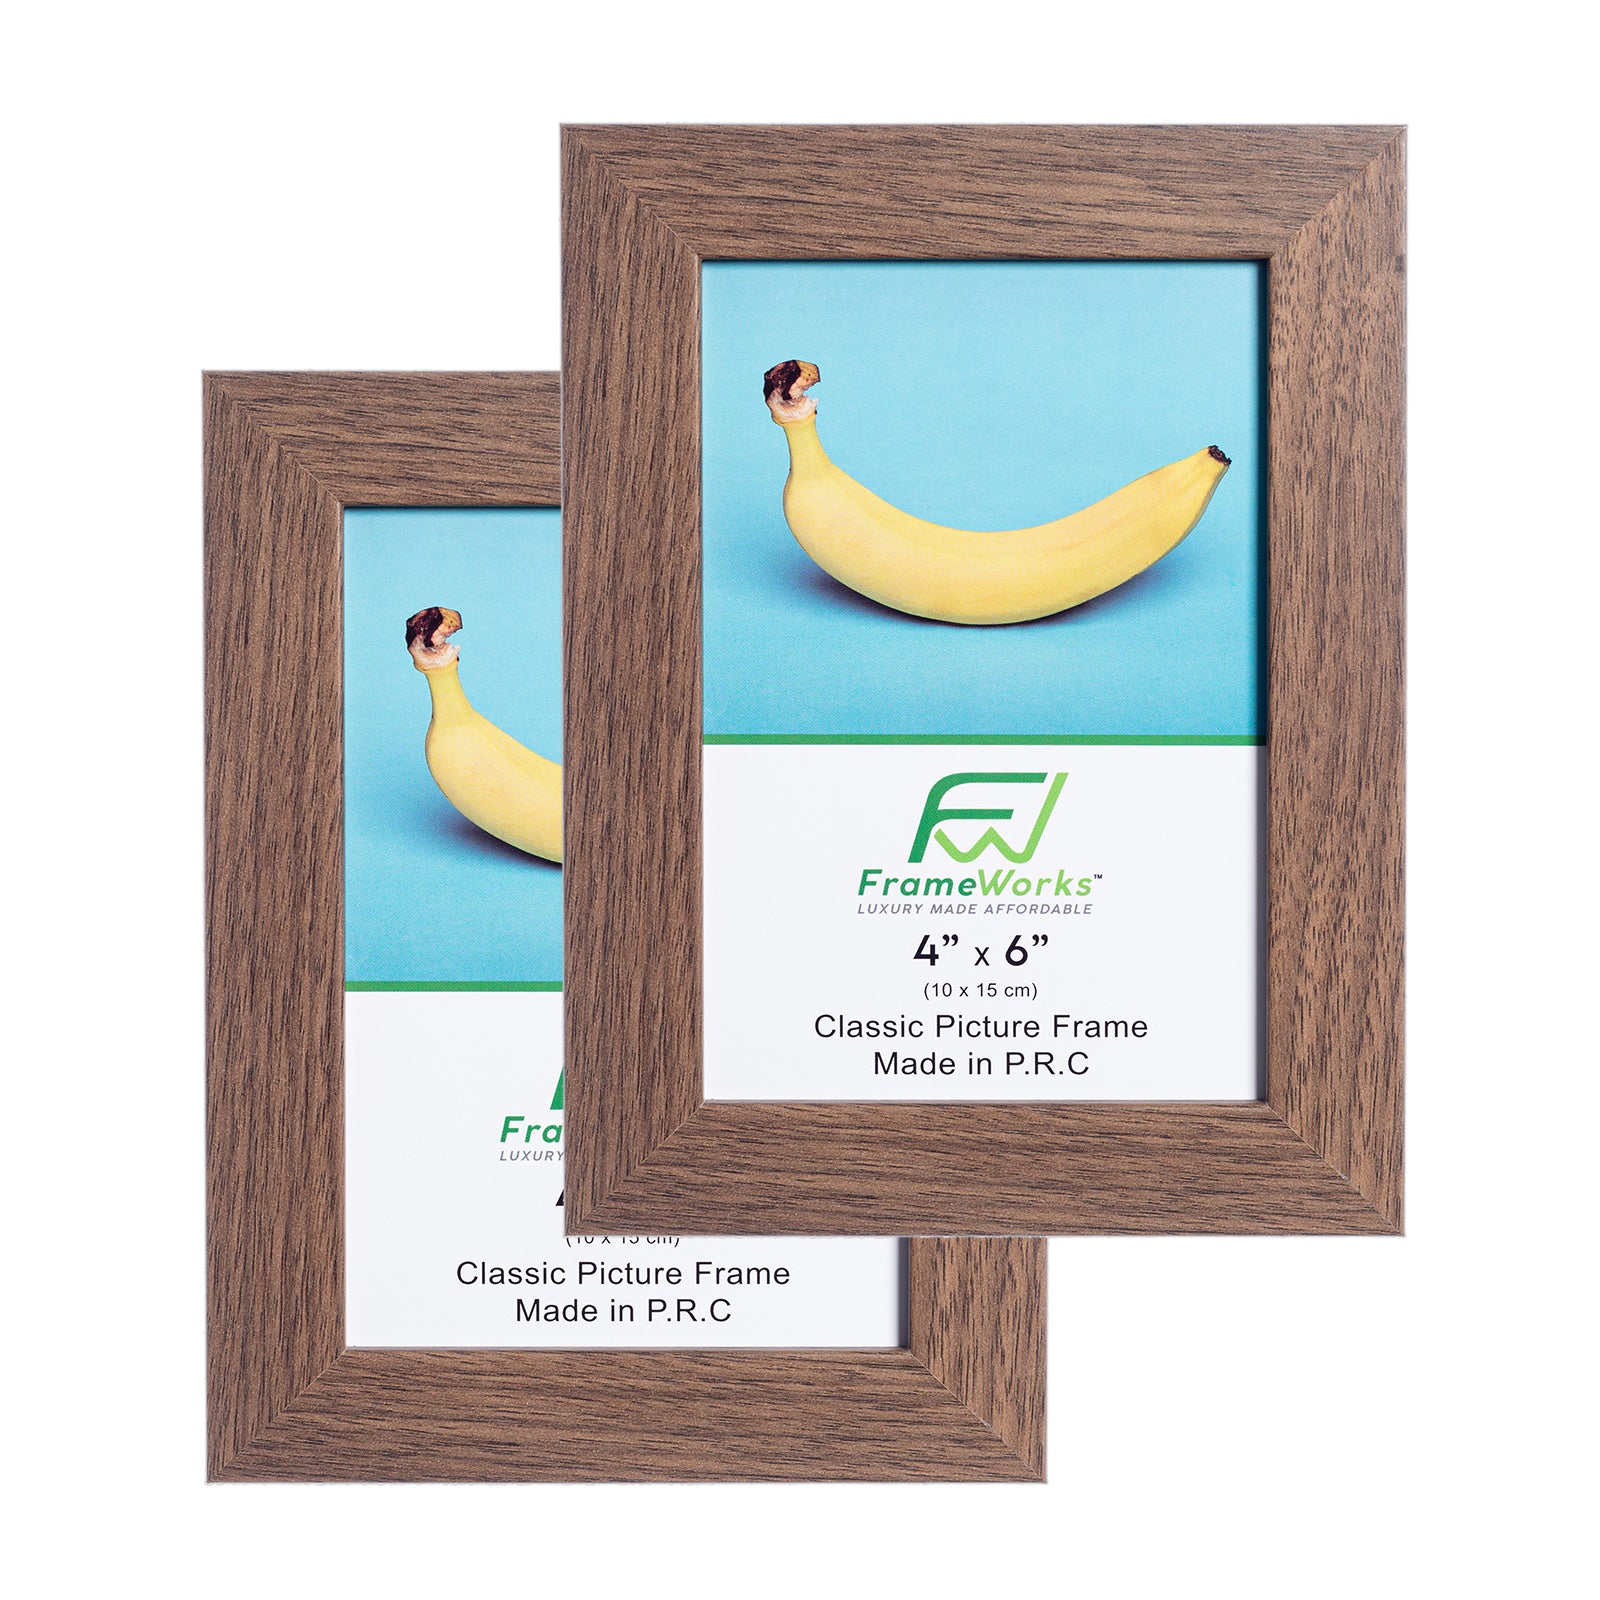 4" x 6” Classic Dark Oak Wood Picture Frame with Tempered Glass